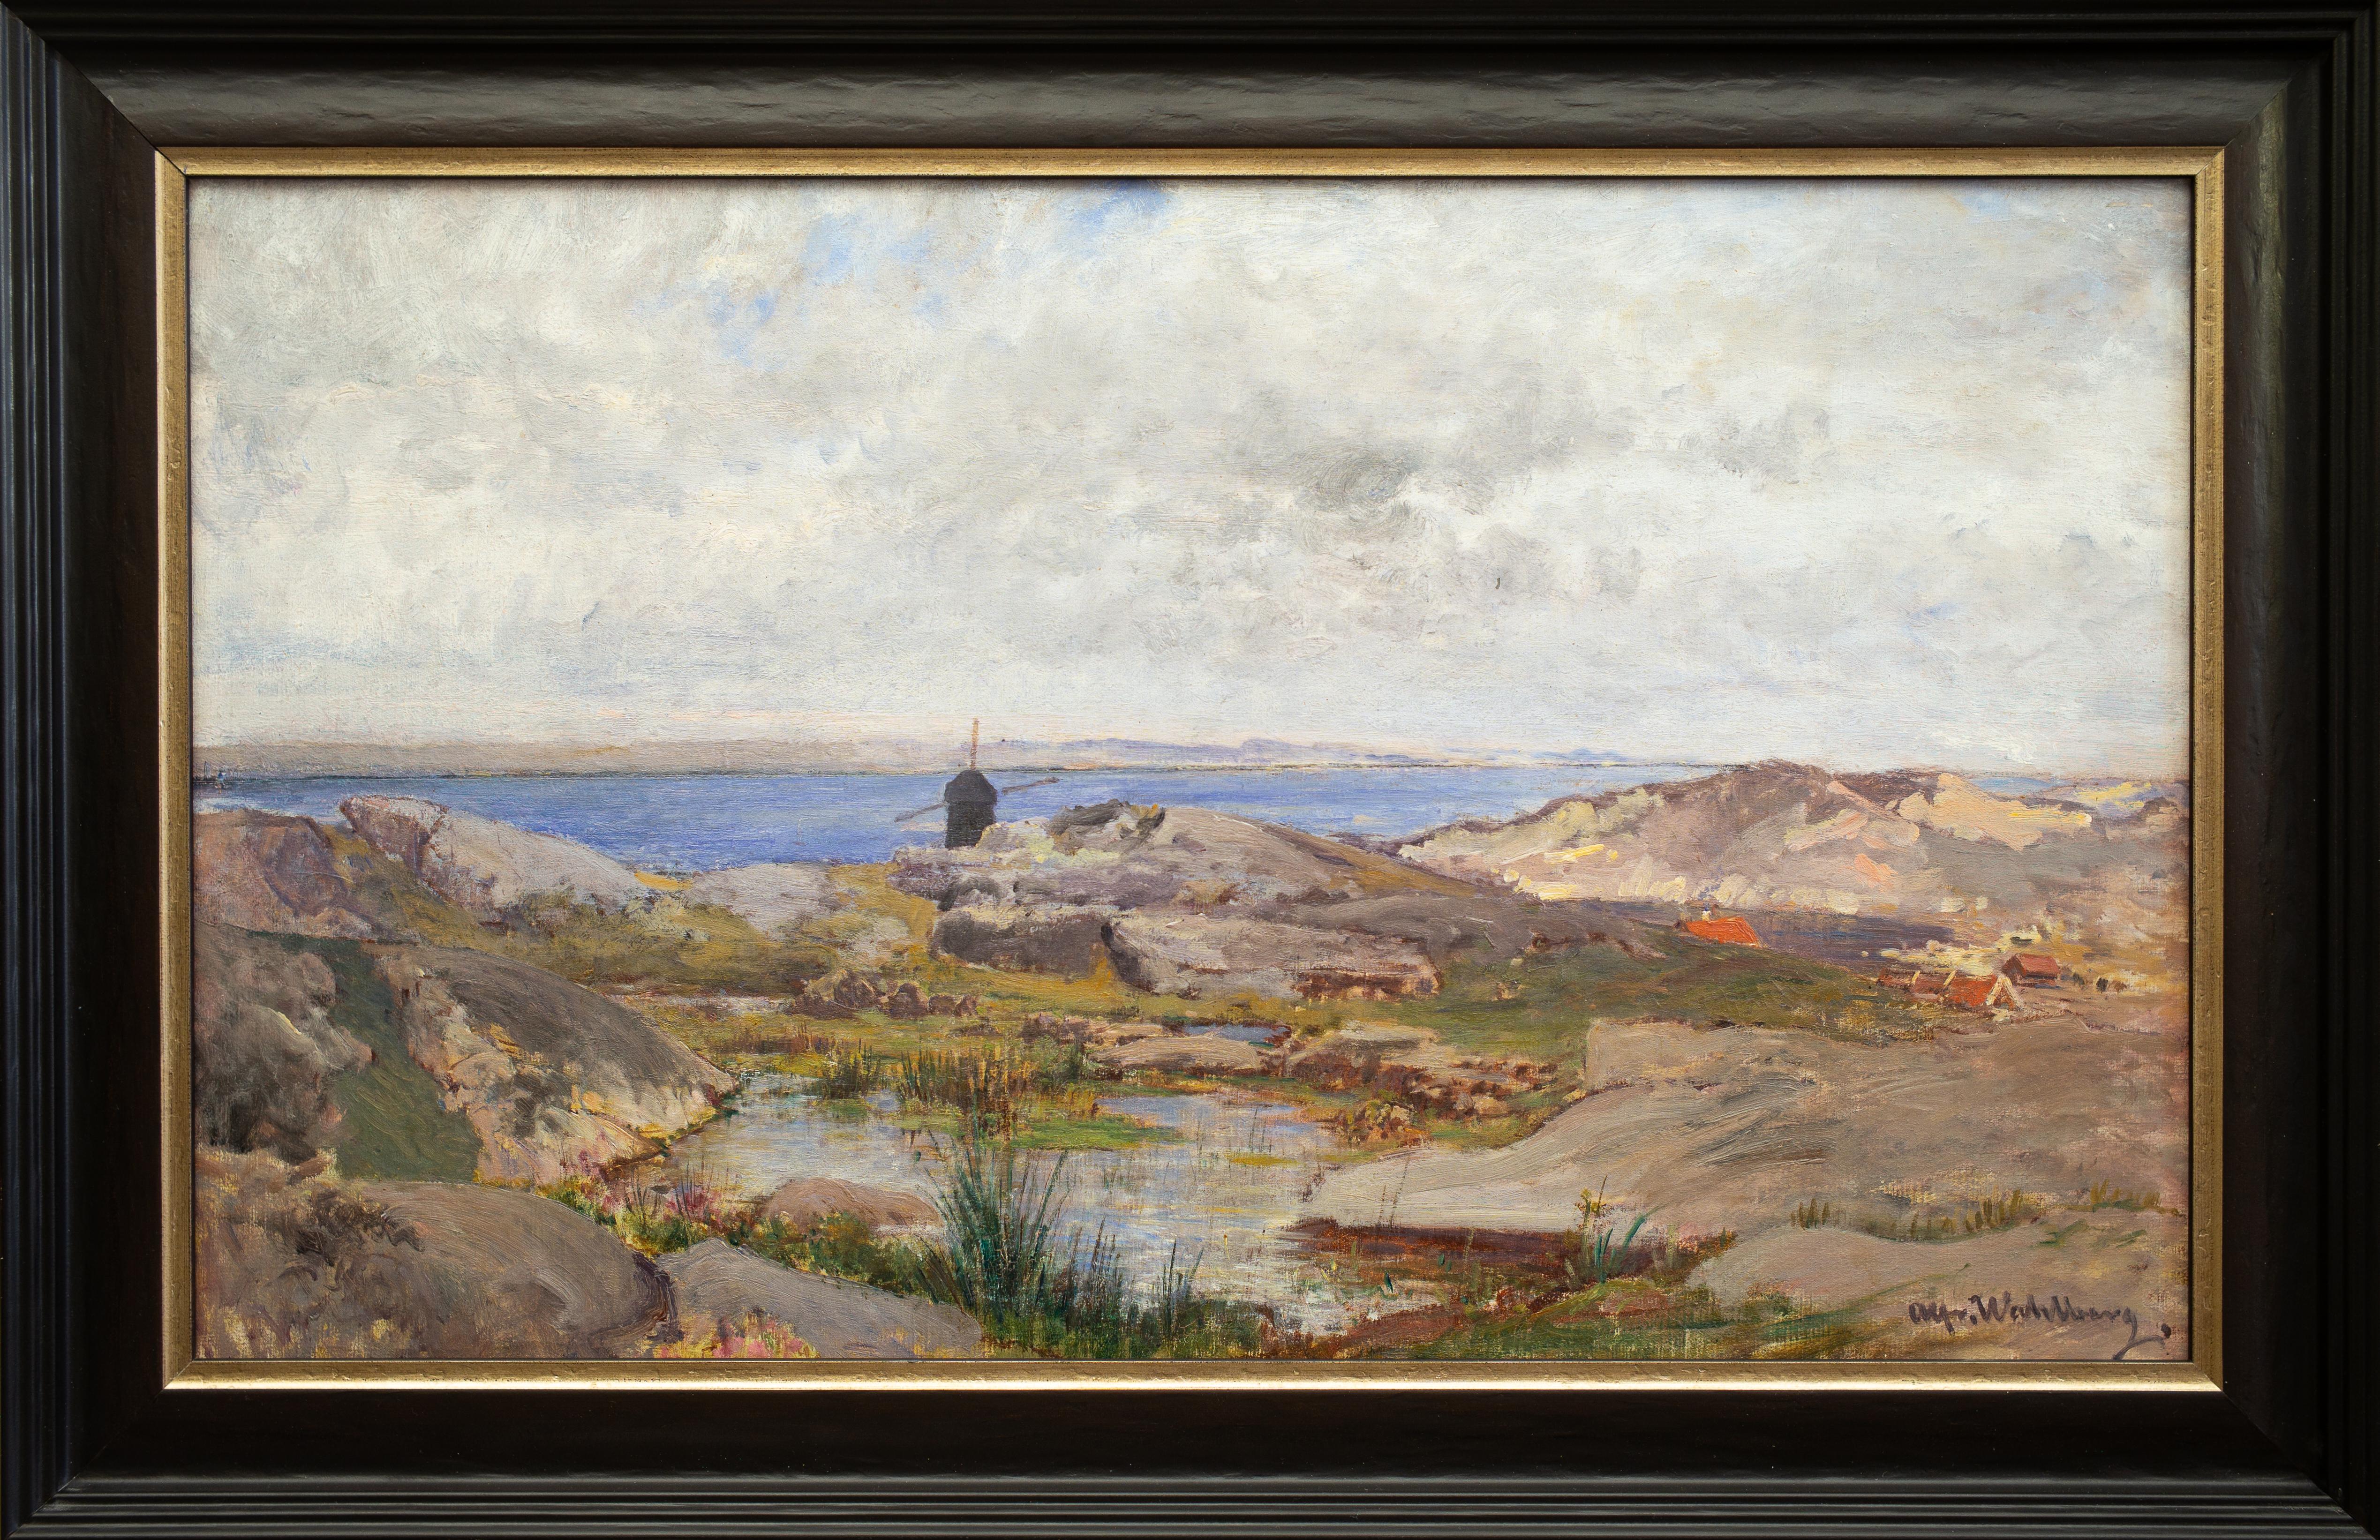 Alfred Wahlberg was a distinguished Swedish landscape painter whose career spanned Germany, France, and Sweden. During his early years, he resided in Düsseldorf, where he was influenced by his mentor, the Norwegian artist Hans Frederik Gude.